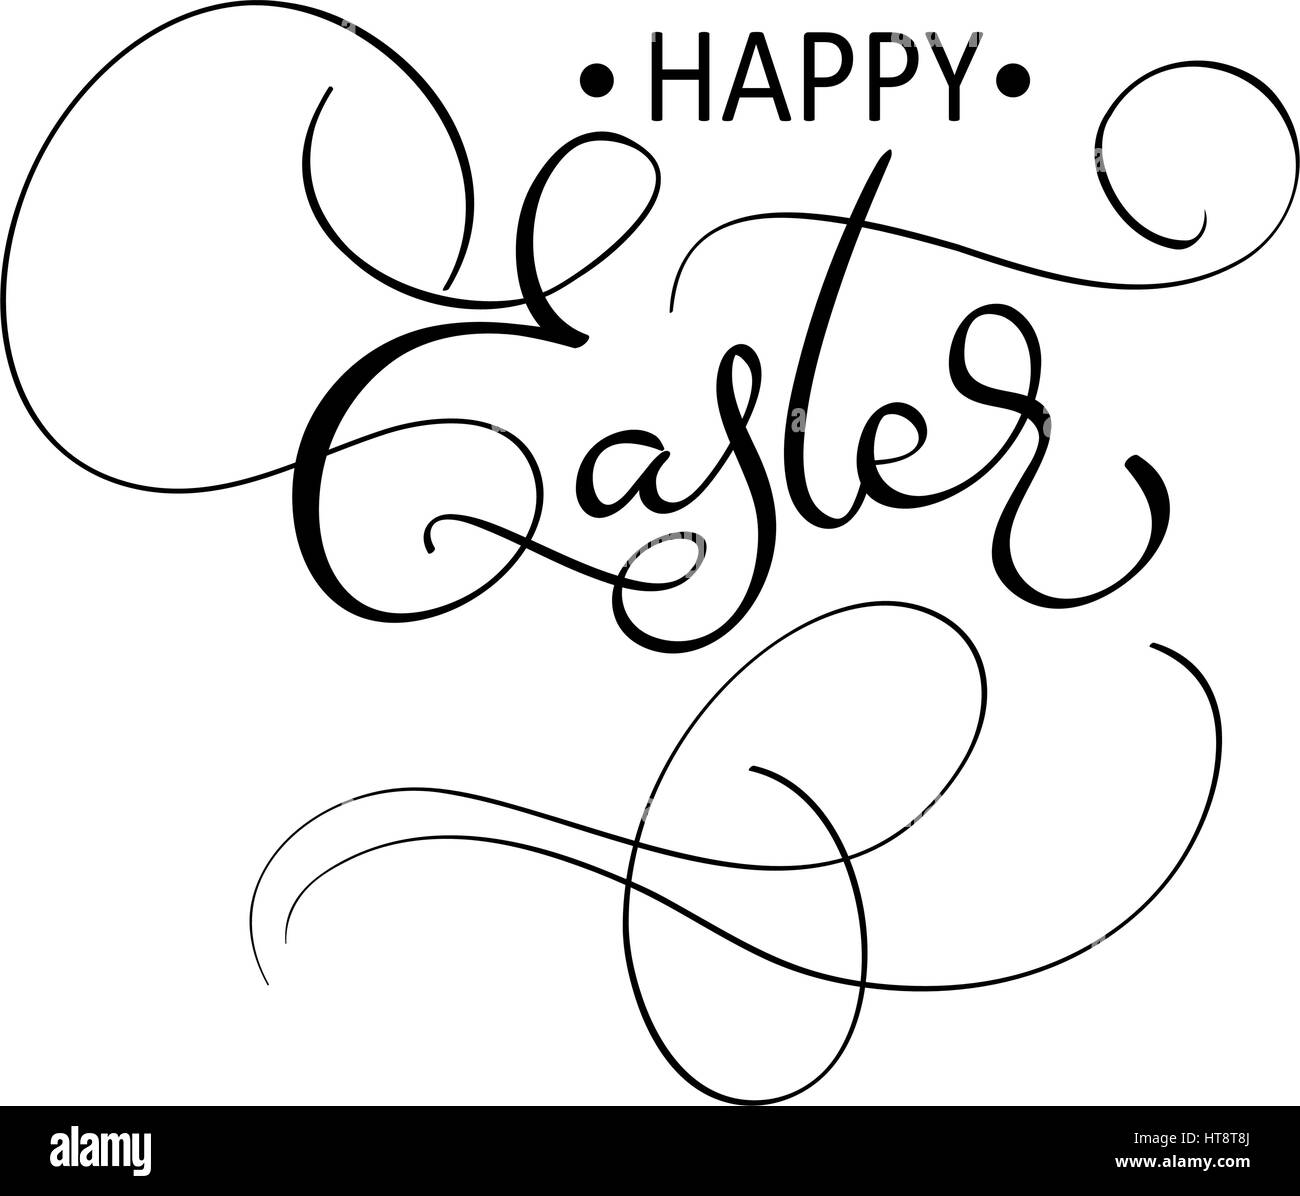 vector happy easter text on white background. Calligraphy lettering Vector illustration EPS10. Stock Vector